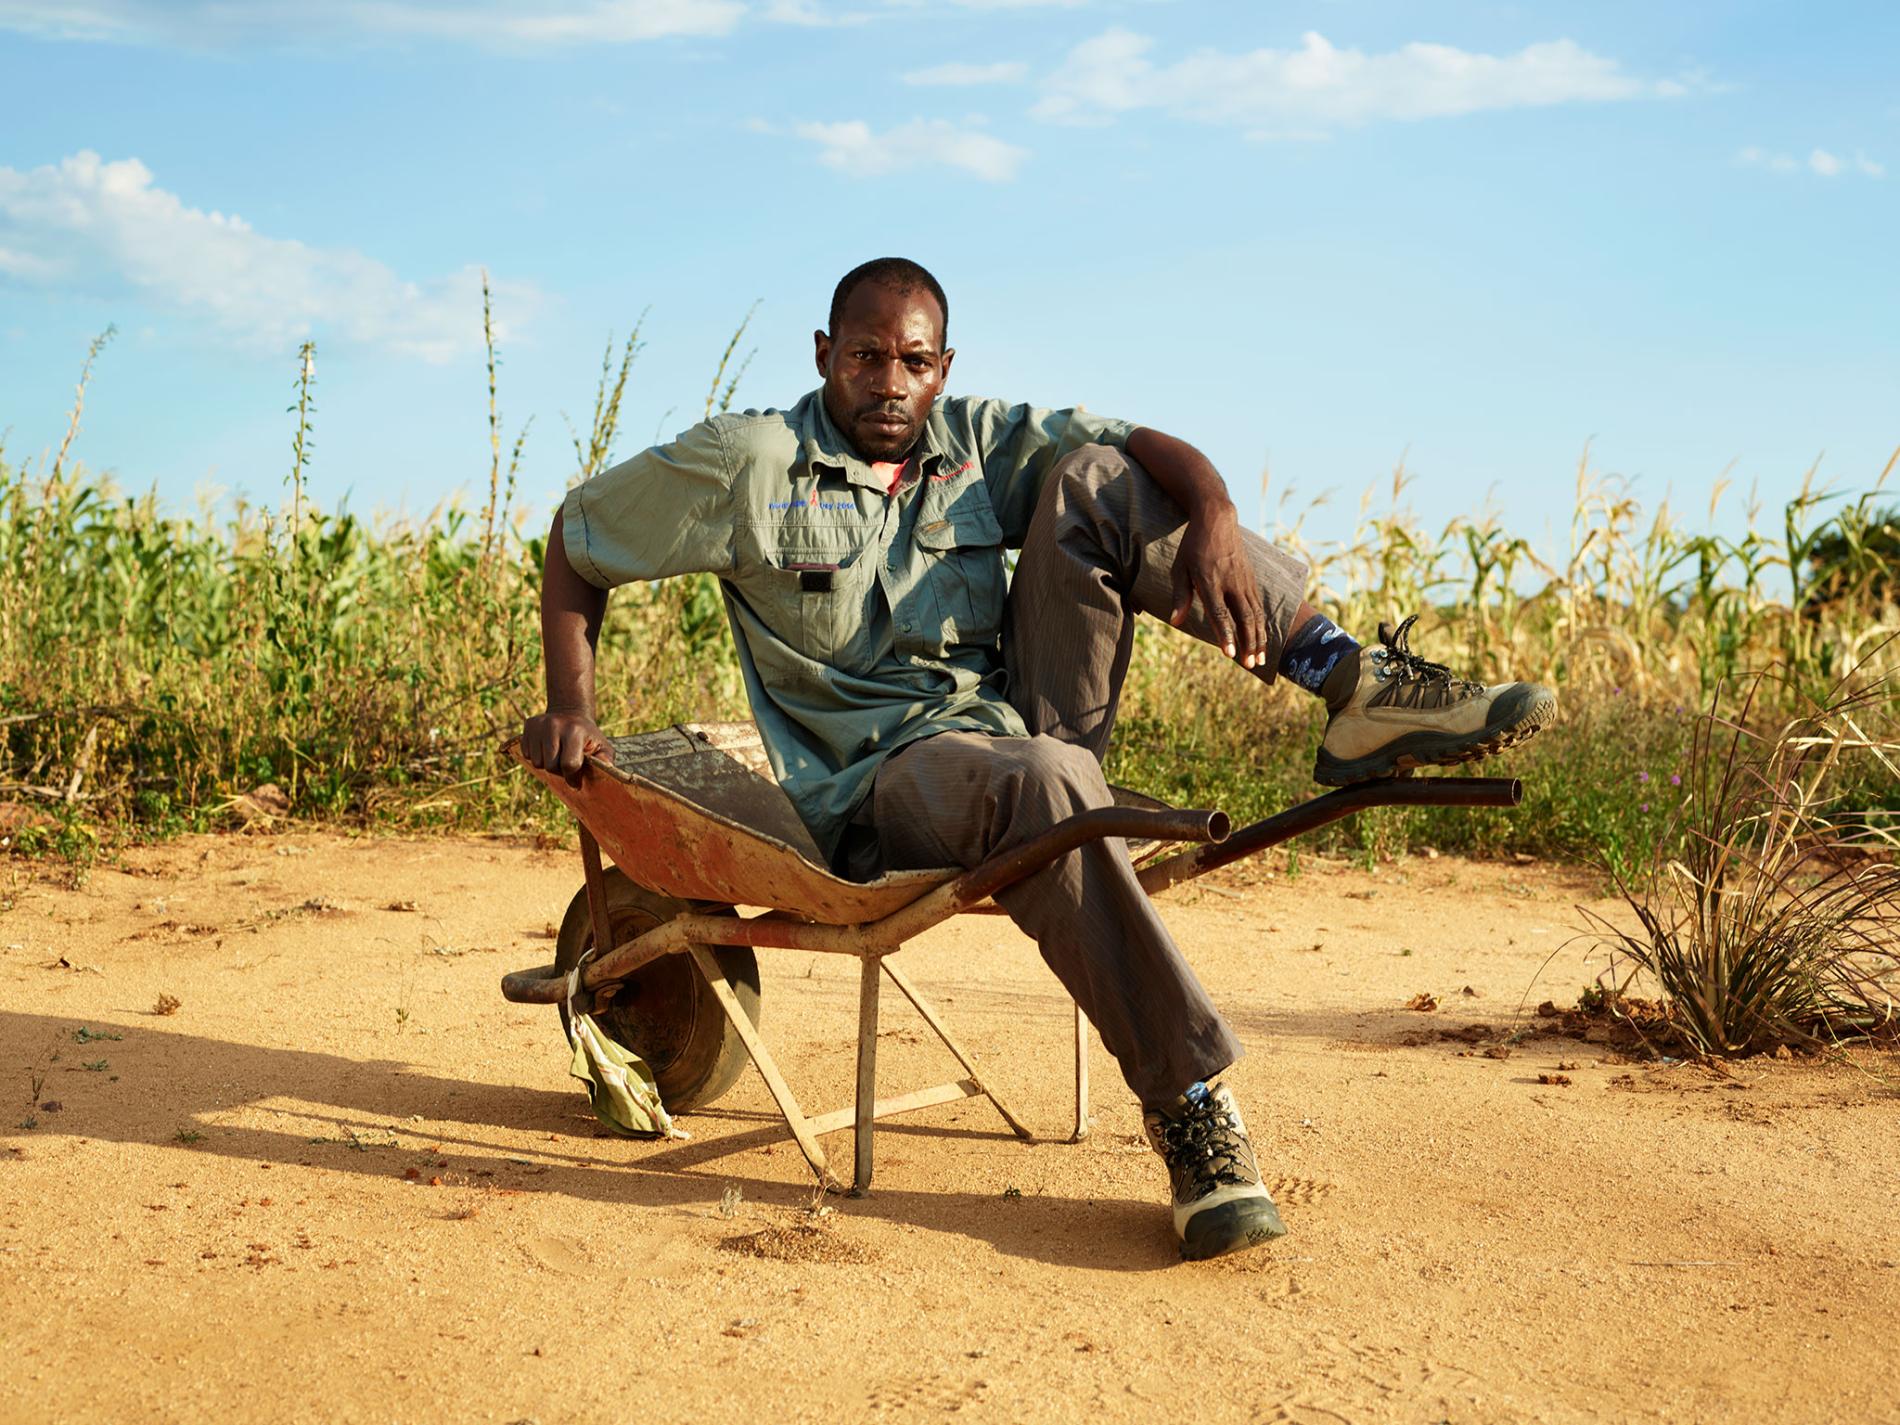 Drought in Zimbabwe has forced farmers like Austin Mugiya to look for new crops that can endure tough conditions.